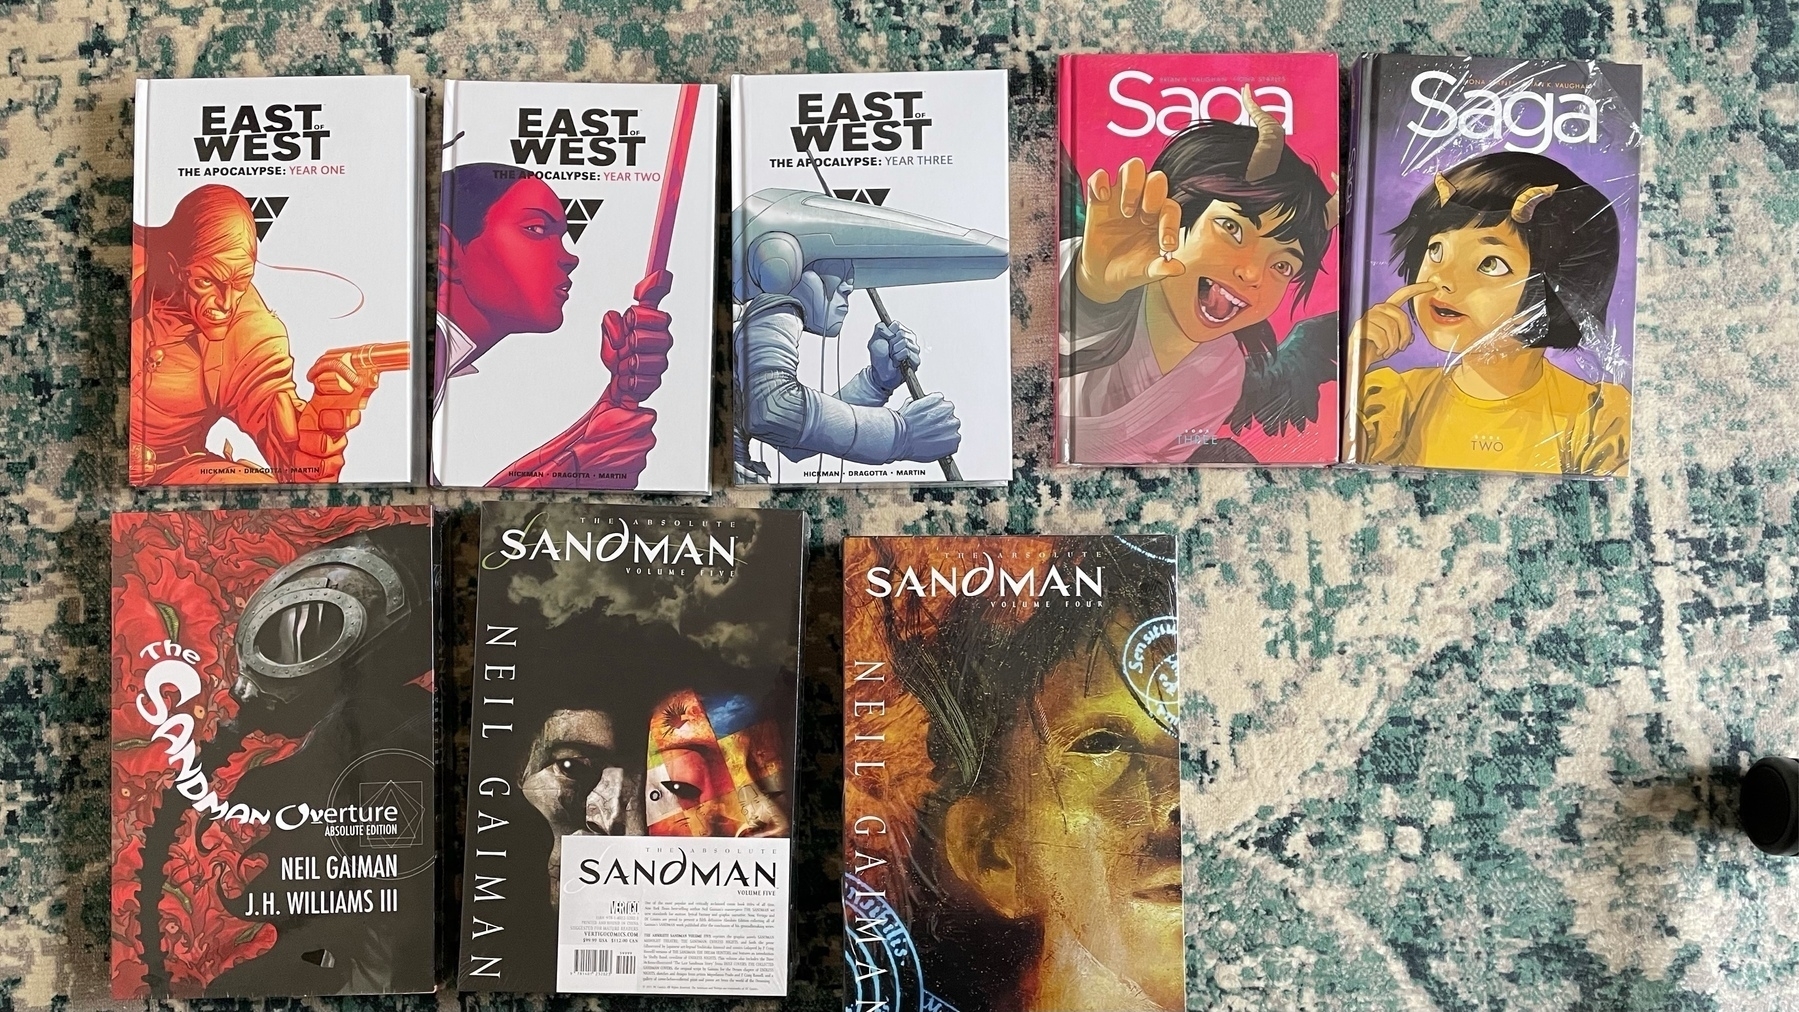 Saga Deluxe 2 and 3, Absolute Sandman IV, V, and Overture, and East of West 1-3